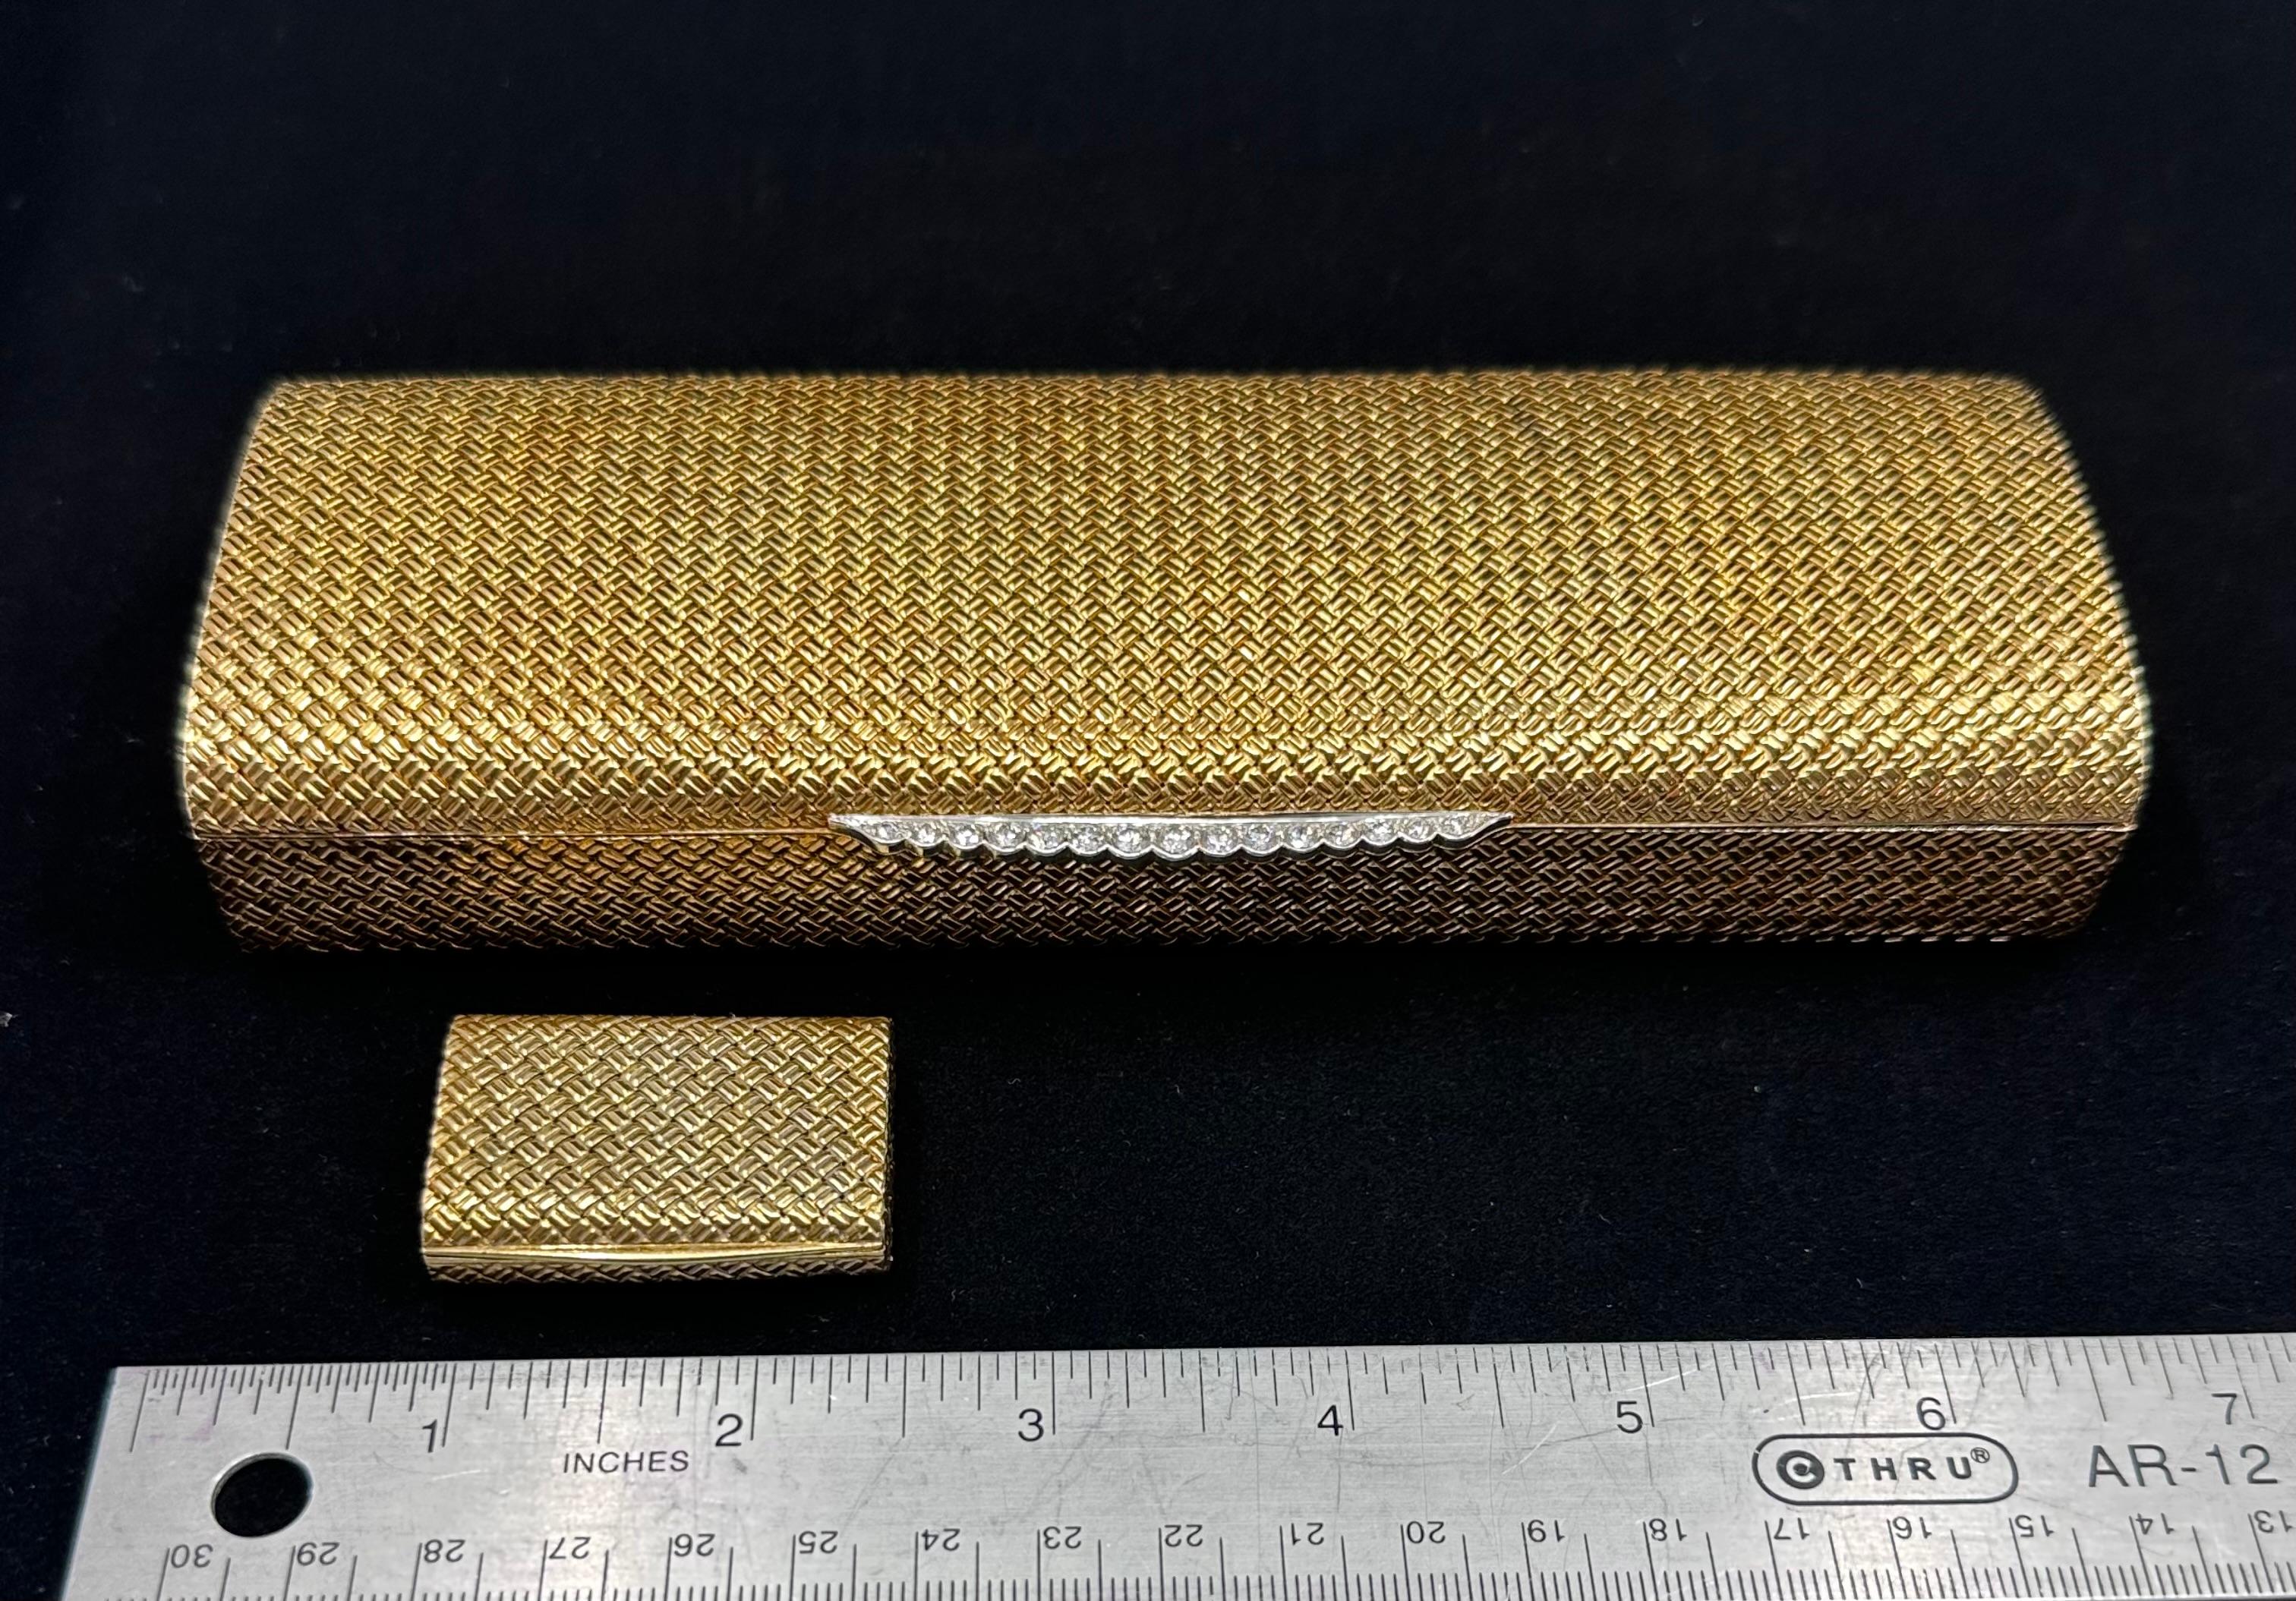 Brilliant Cut Van Cleef and Arpels Gold and Diamond Minaudière Box Clutch  For Sale